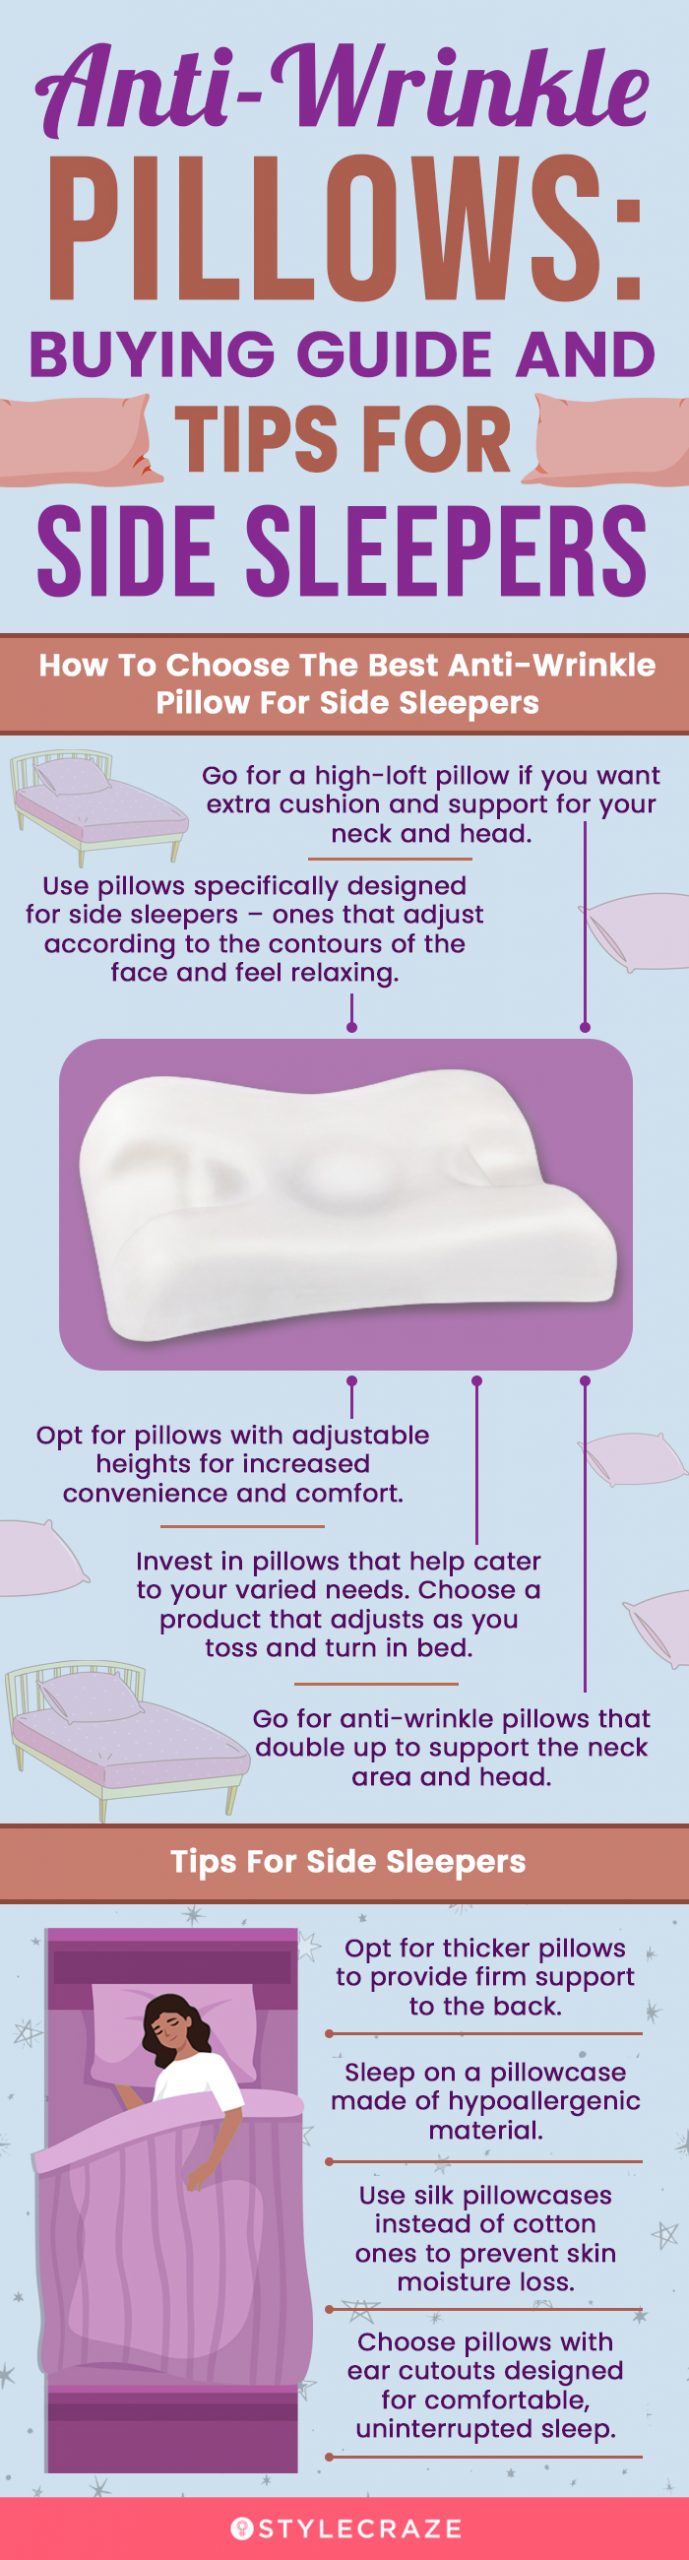 Anti-Wrinkle Pillows: Buying Guide & Tips For Side Sleepers [infographic]